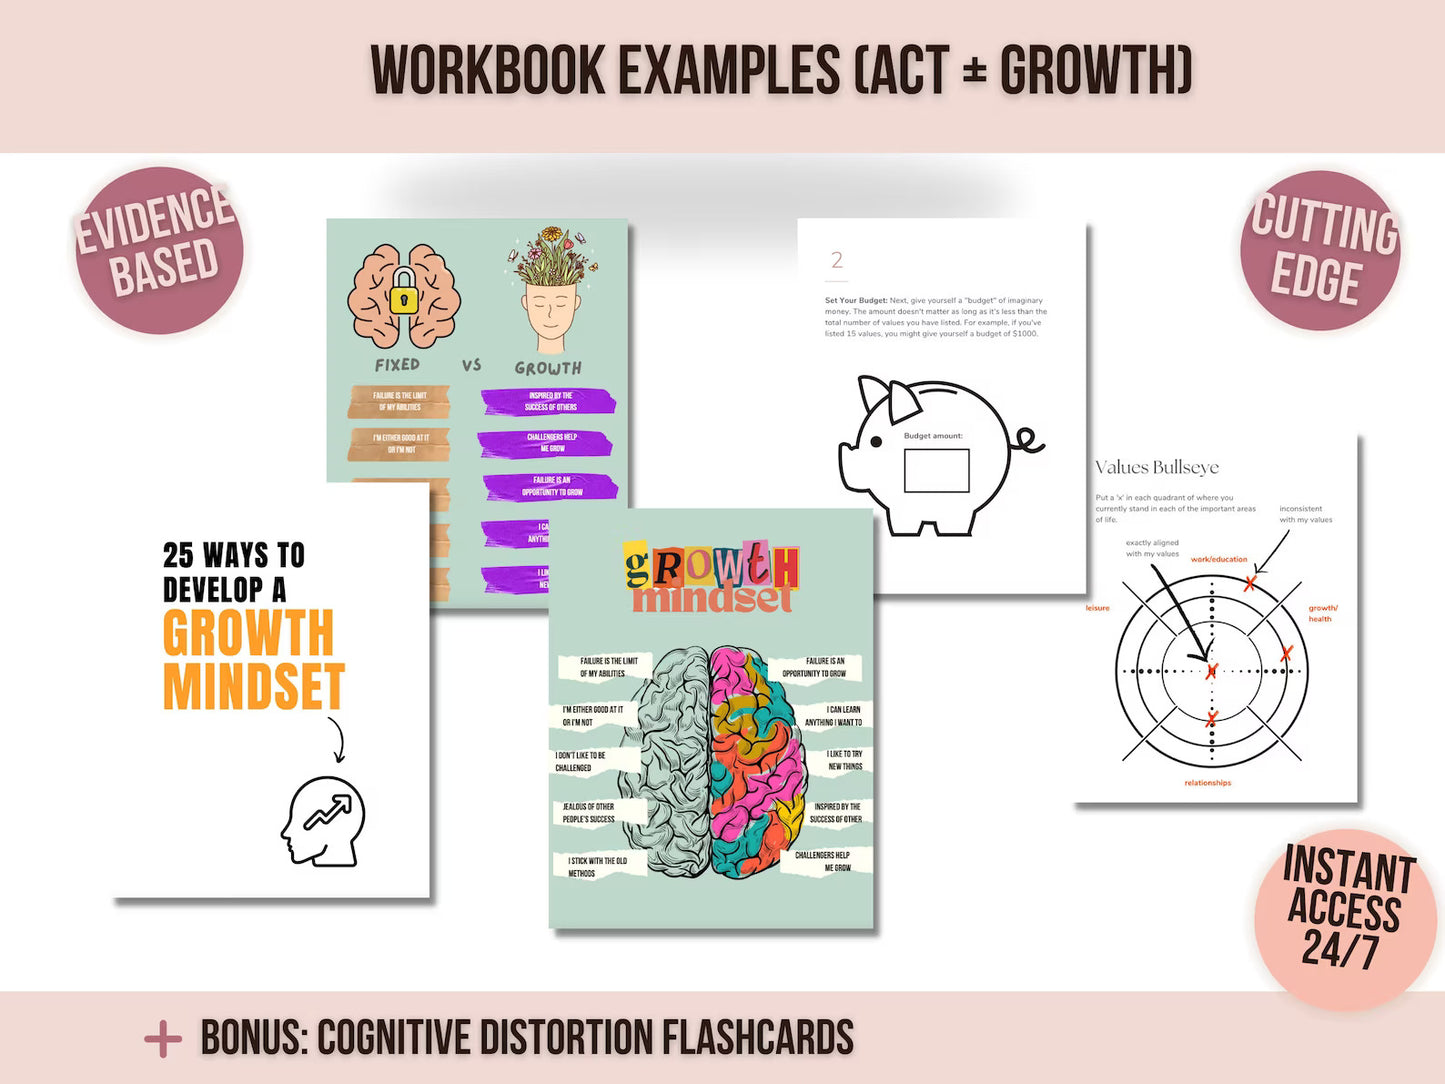 Therapy Worksheets Bundle – 1300+ Pages for CBT, DBT, ACT | Mental Health Workbooks Pdf, anxiety, depression, trauma, exposure, self-help + 8 Ebooks 90% OFF